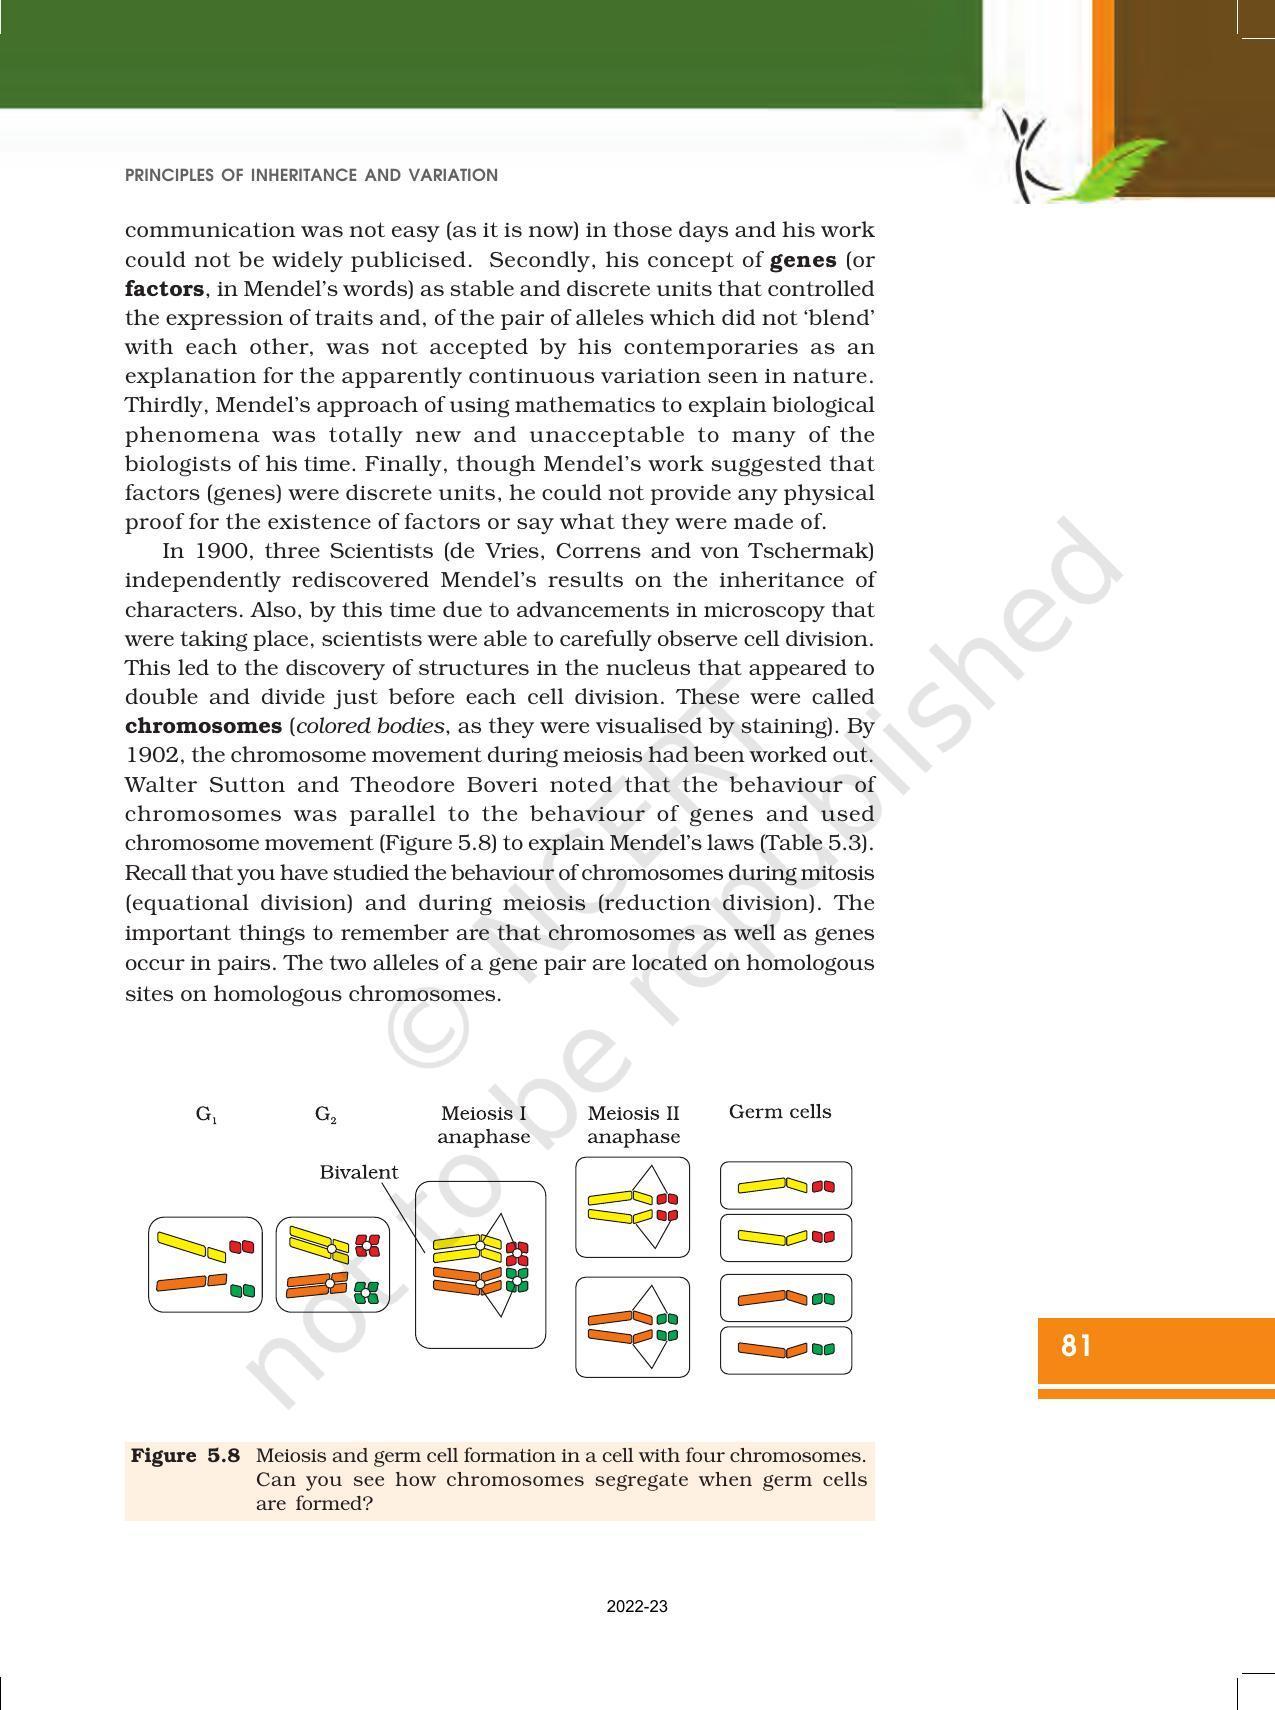 NCERT Book for Class 12 Biology Chapter 5 Principles of Inheritance and Variation - Page 15